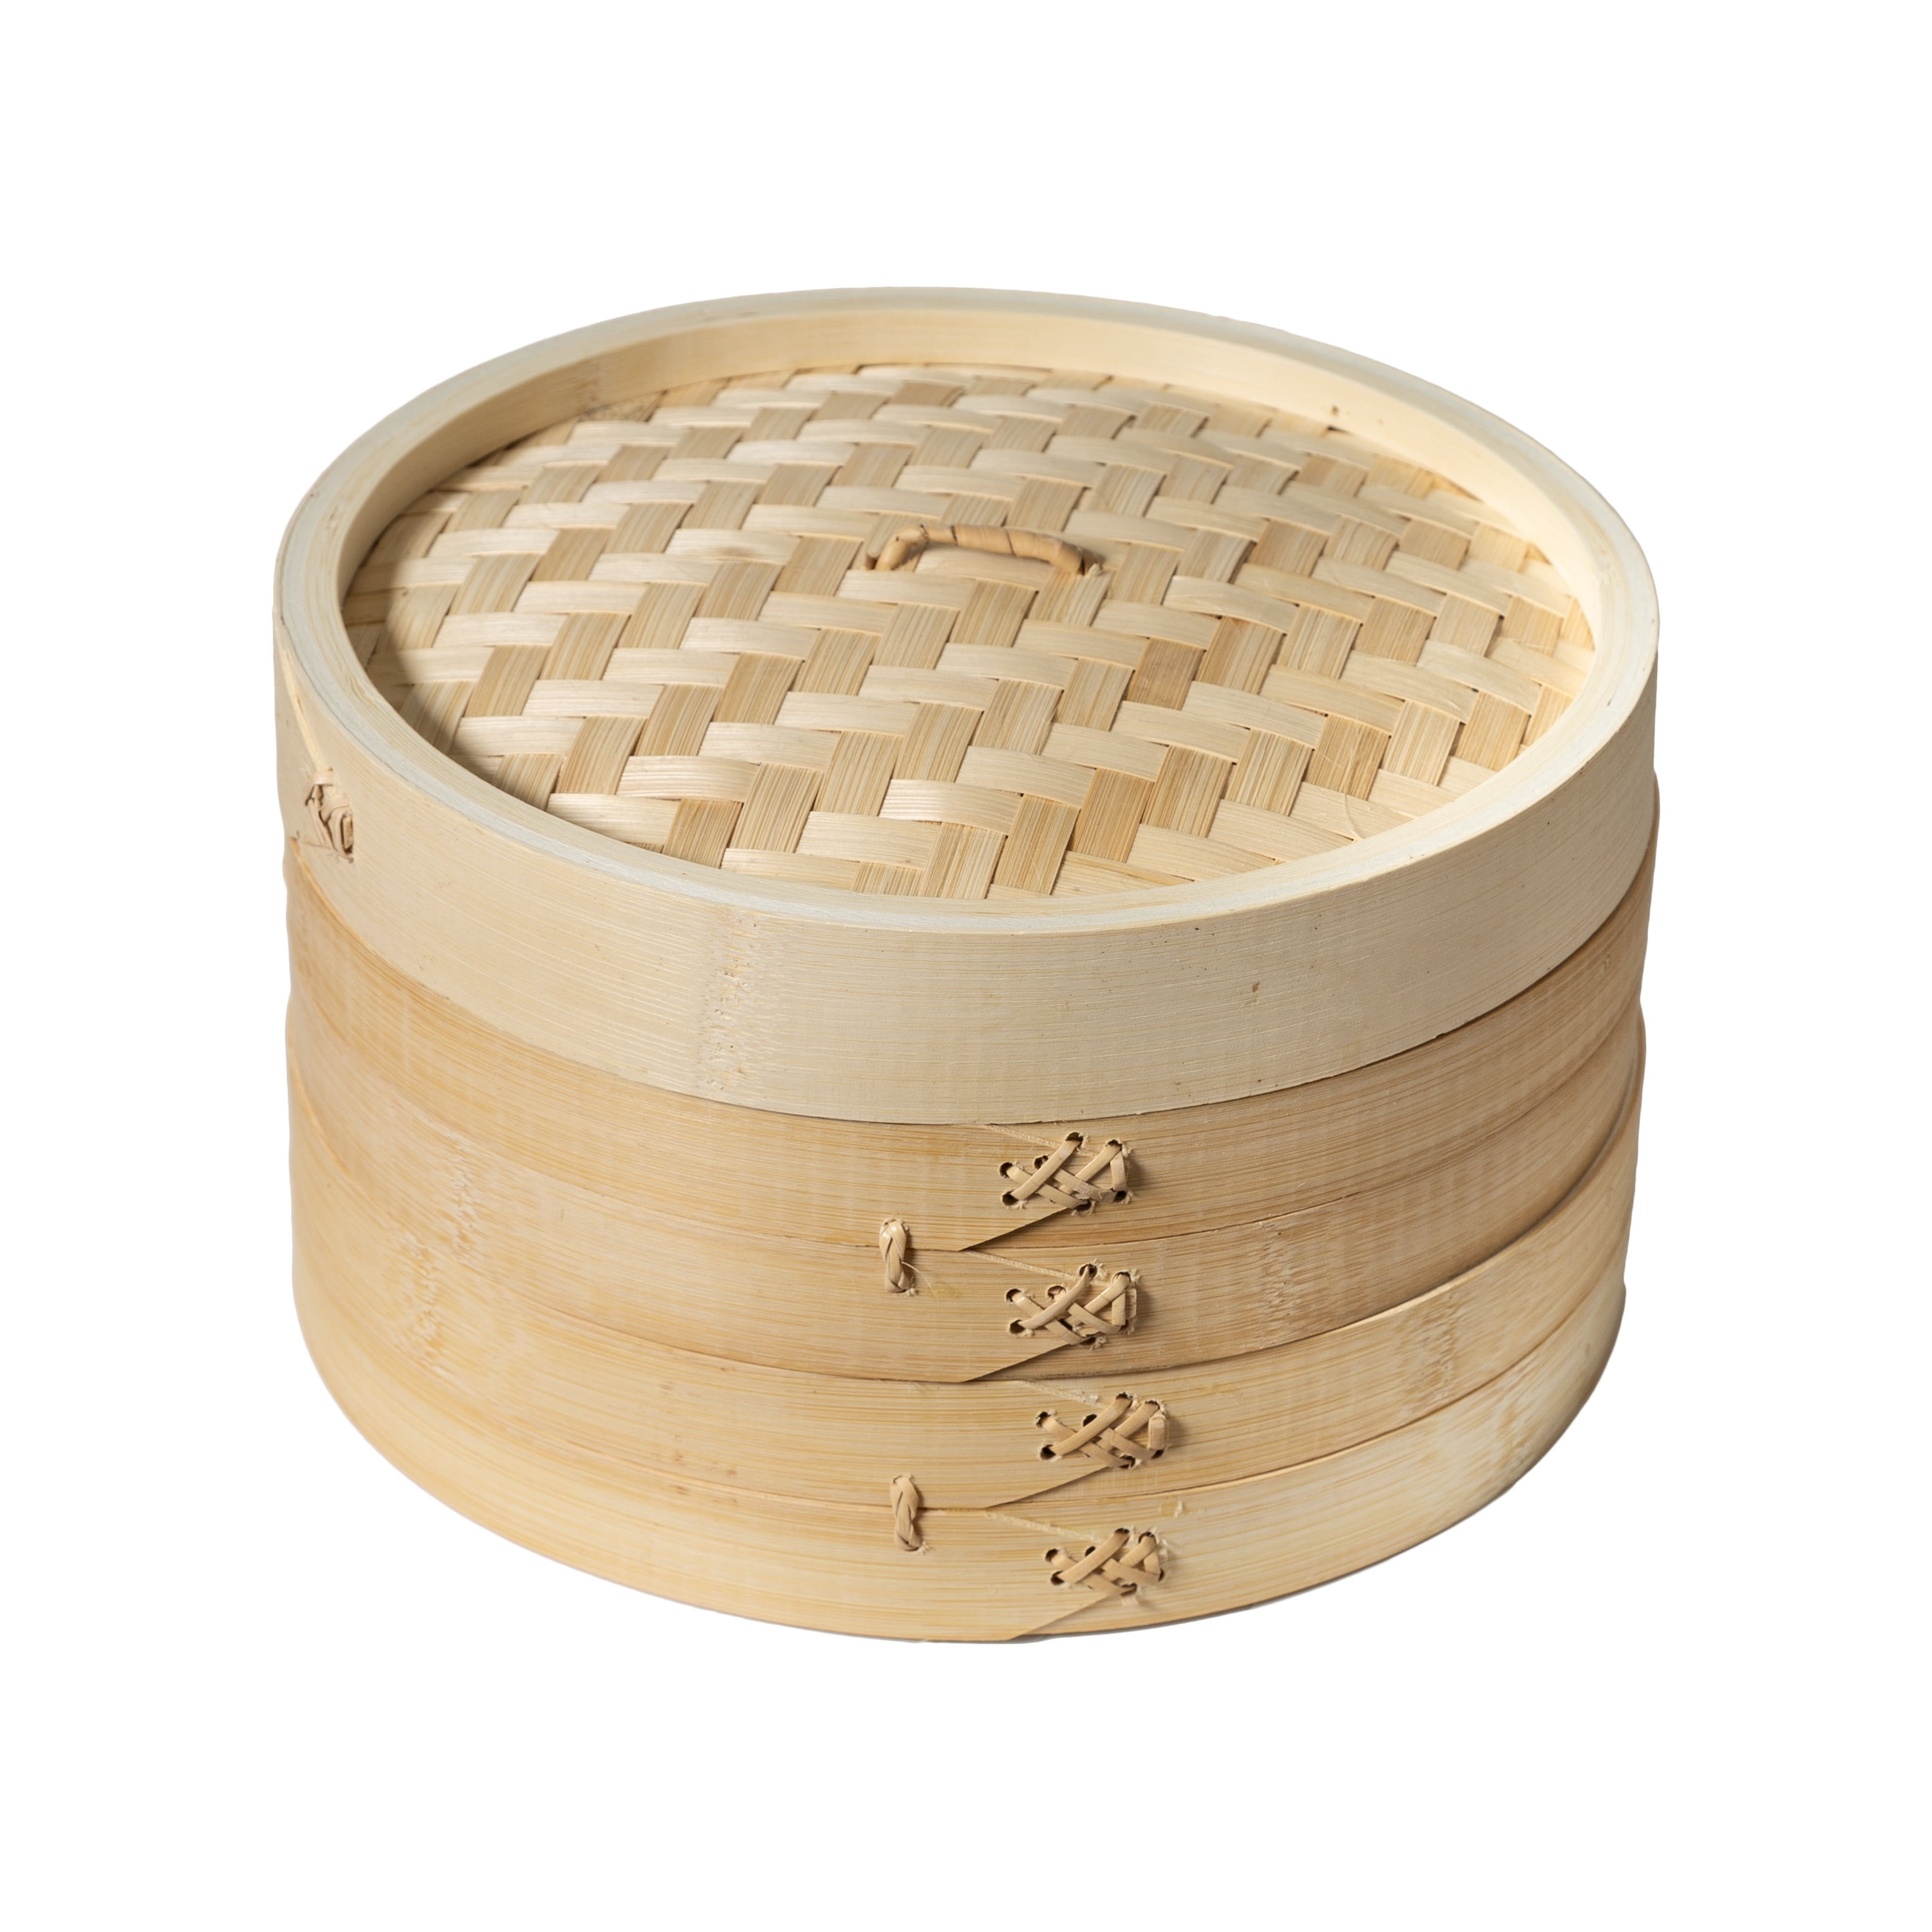 Gerich Steamer Basket Bamboo with Stainless Steel Ring Set Food Steamer,  Soul Kitchen Bamboo Steamer Basket for Bao Buns